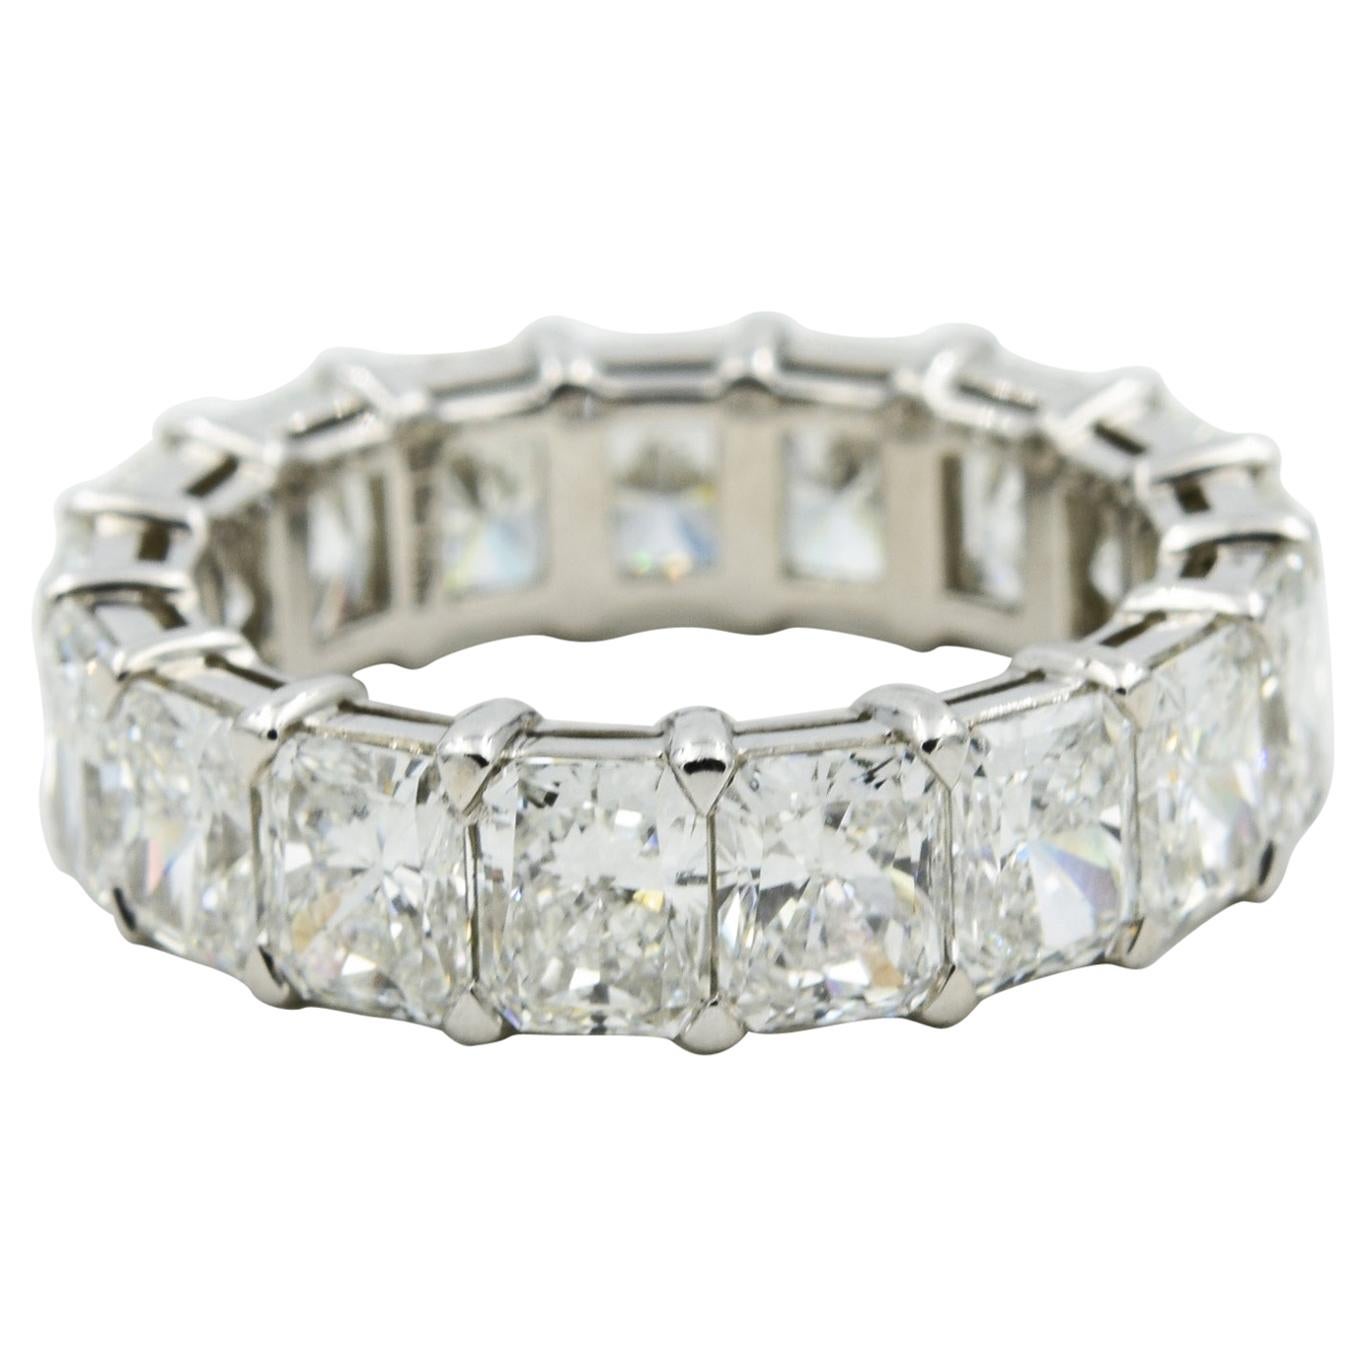 7.15 Carat Radiant Diamond Eternity Band by Norman Silverman in Platinum